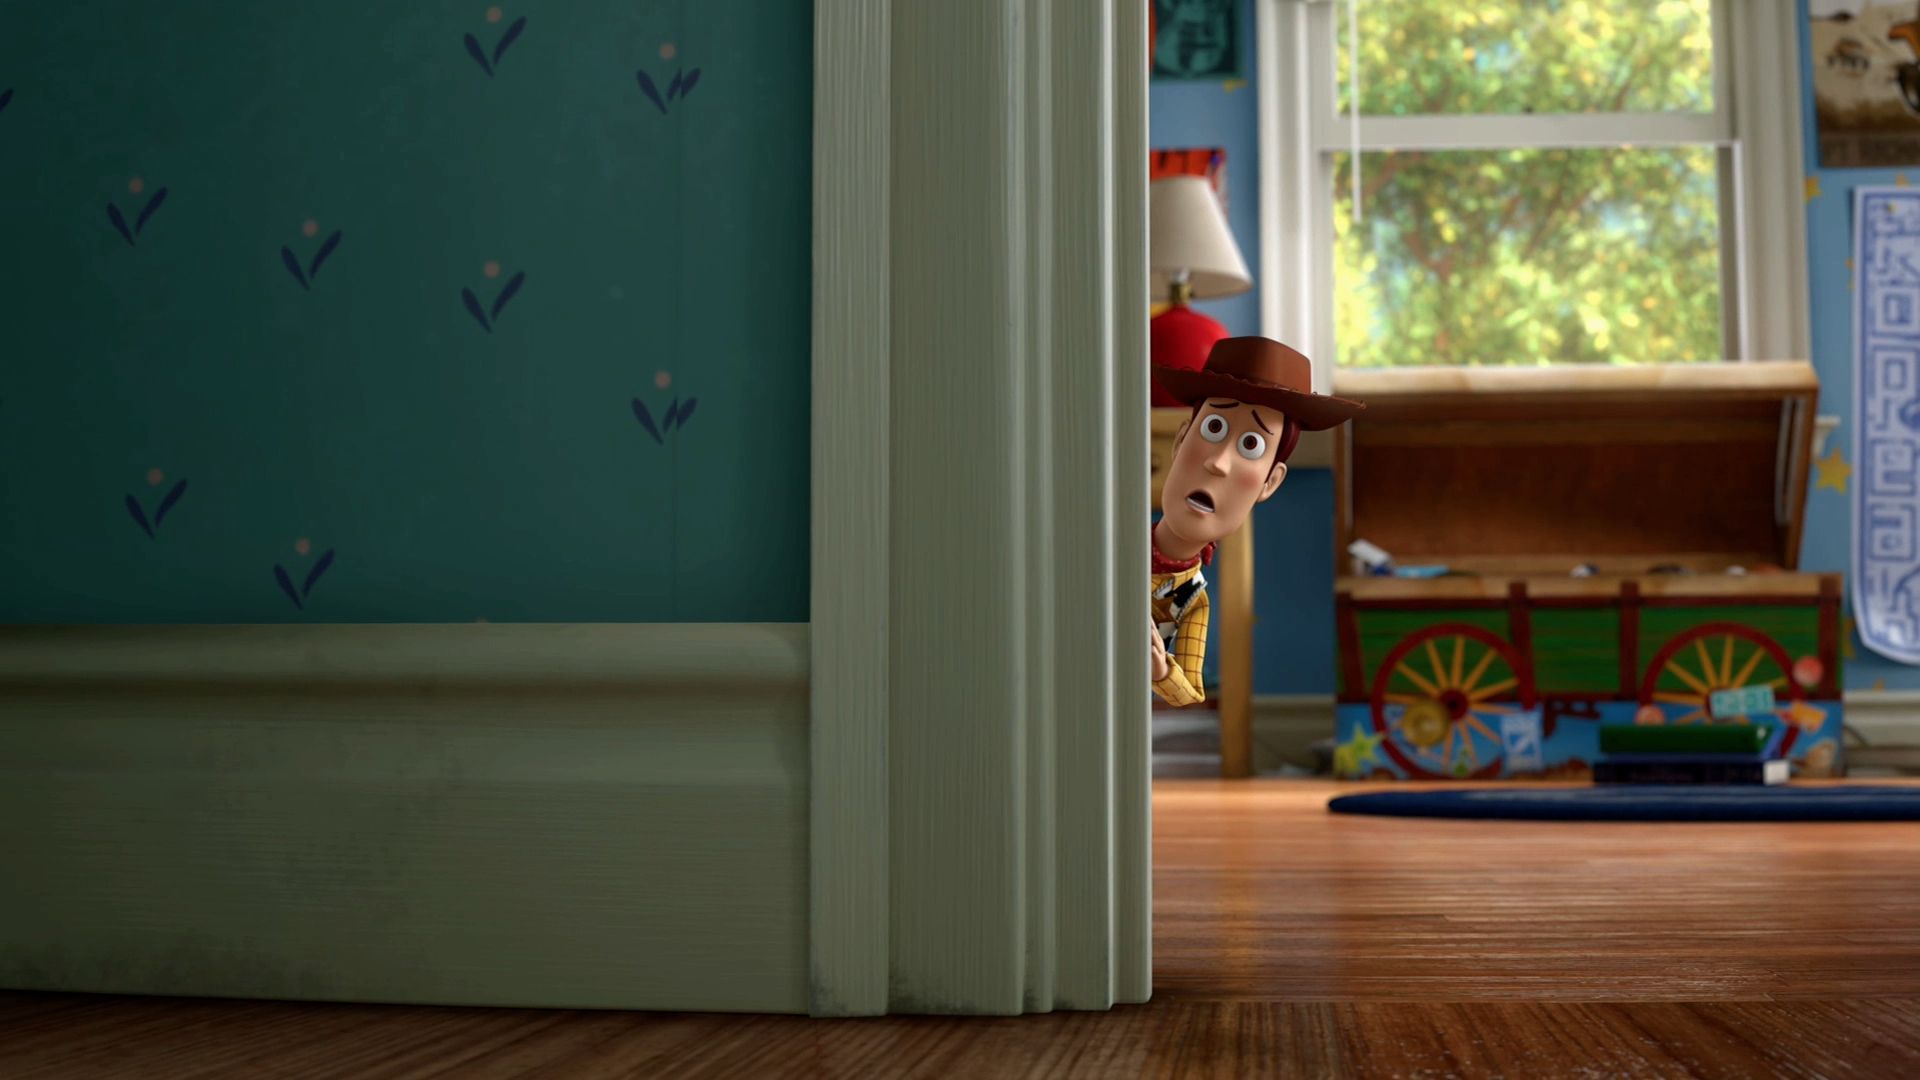 Toy Story Computer Wallpapers, Desktop Backgrounds | 1920x1080 ...